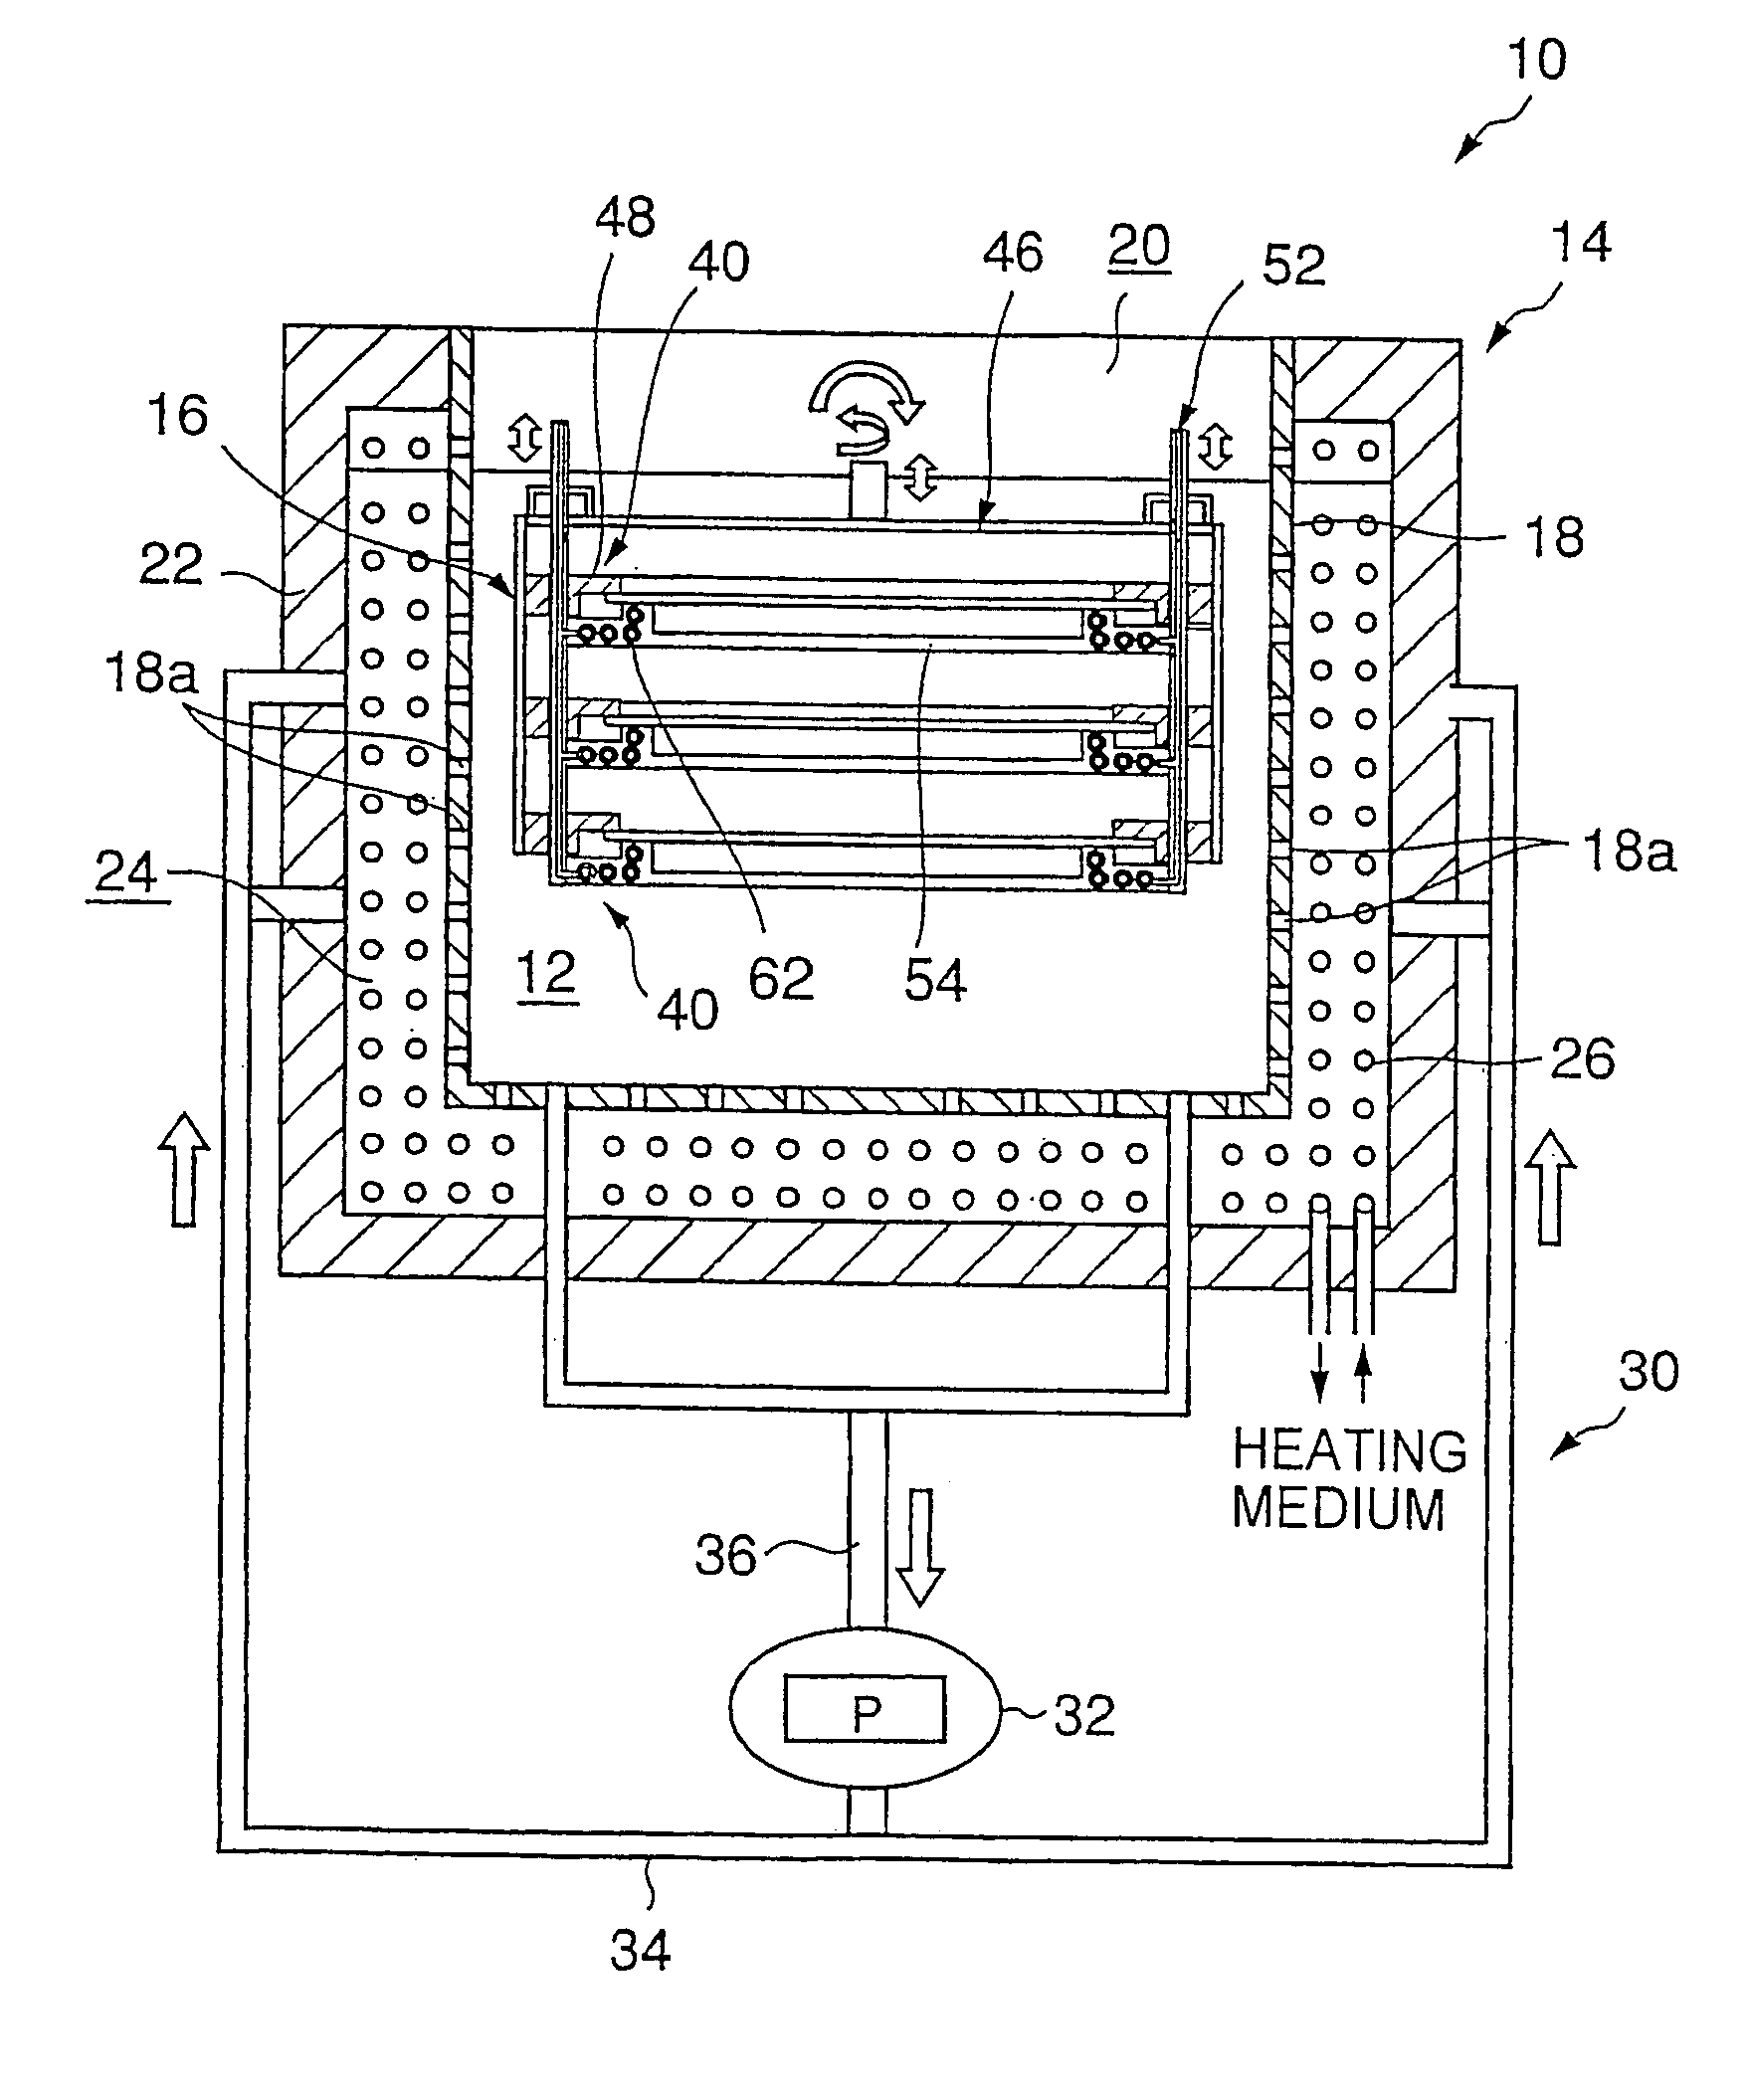 Substrate processing apparatus and method